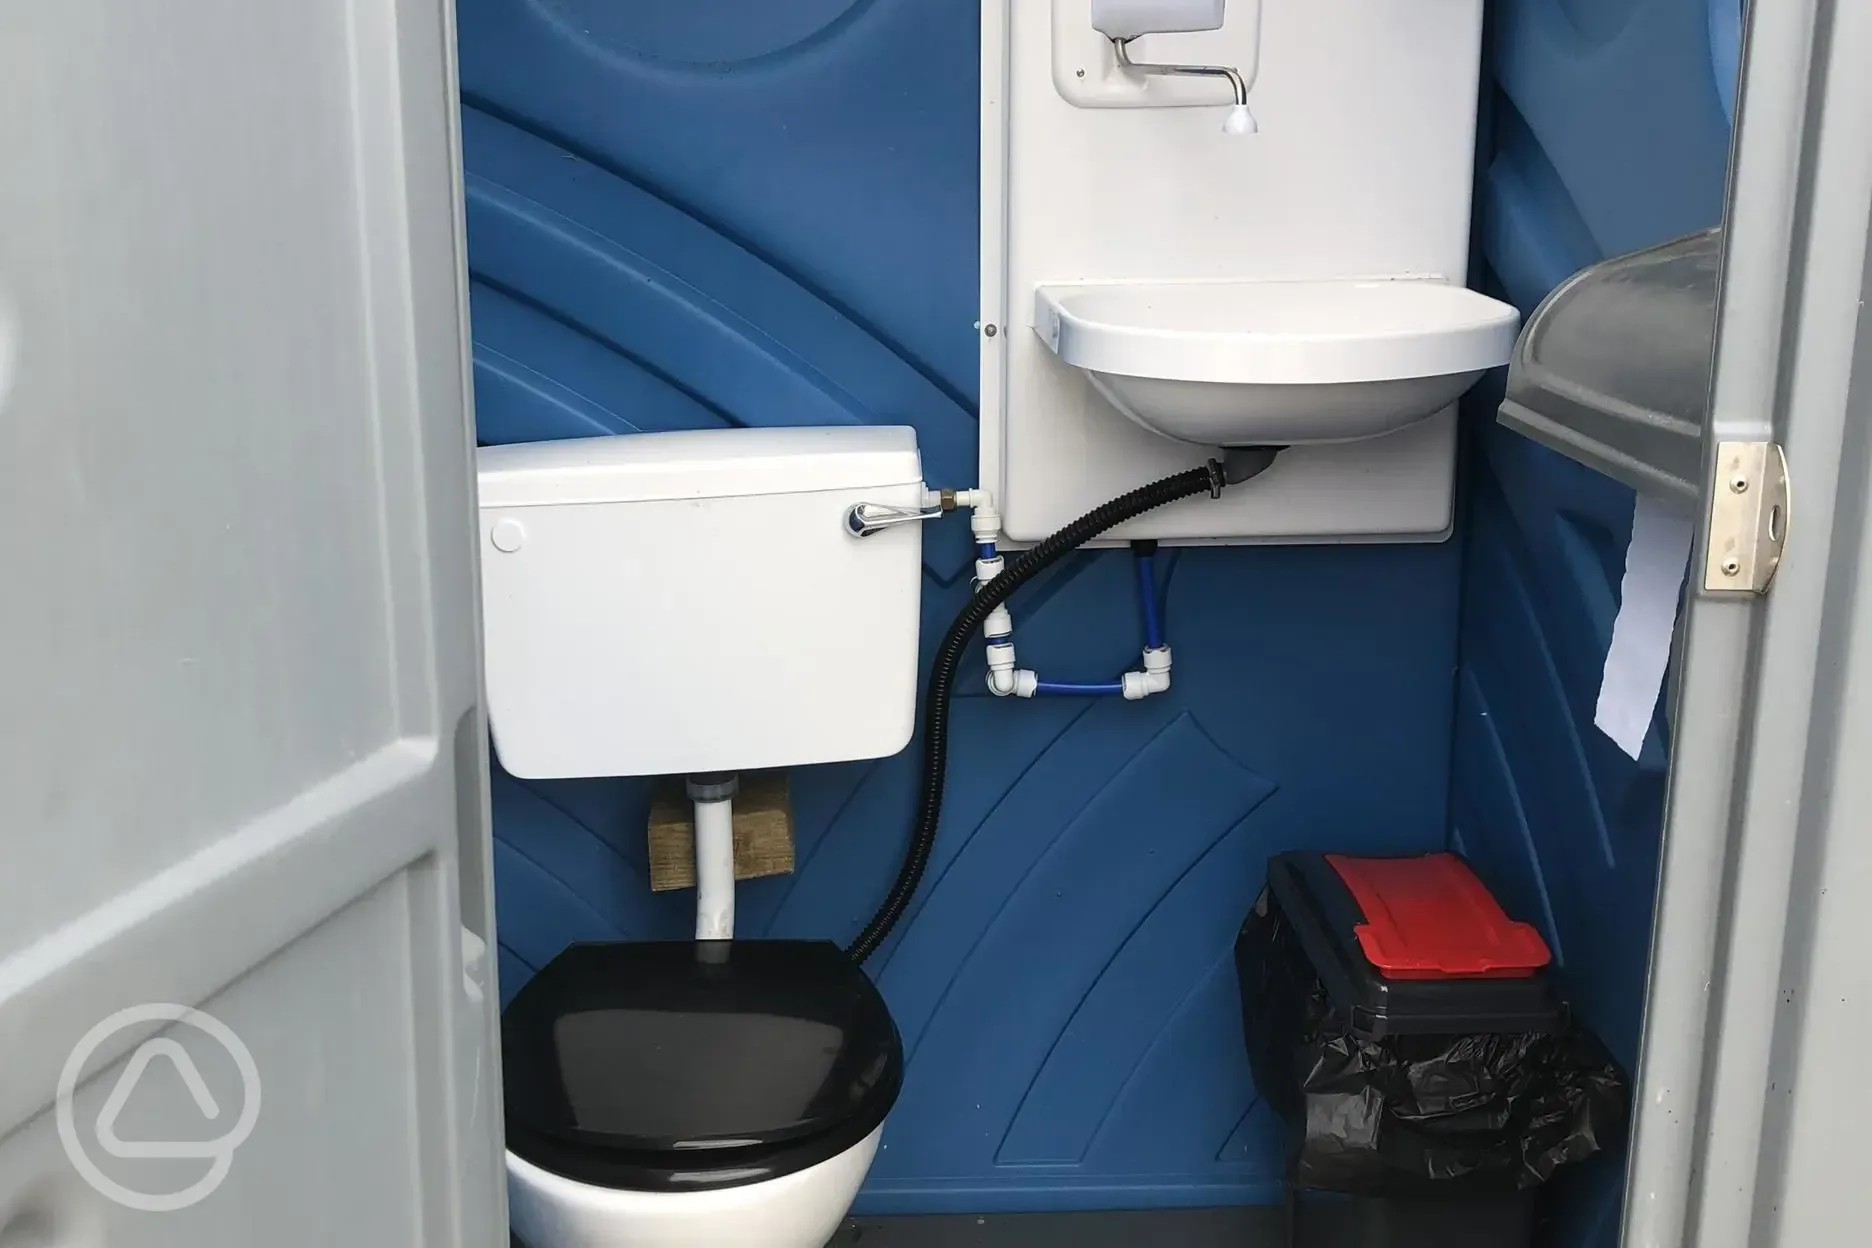 Inside the portable toilet